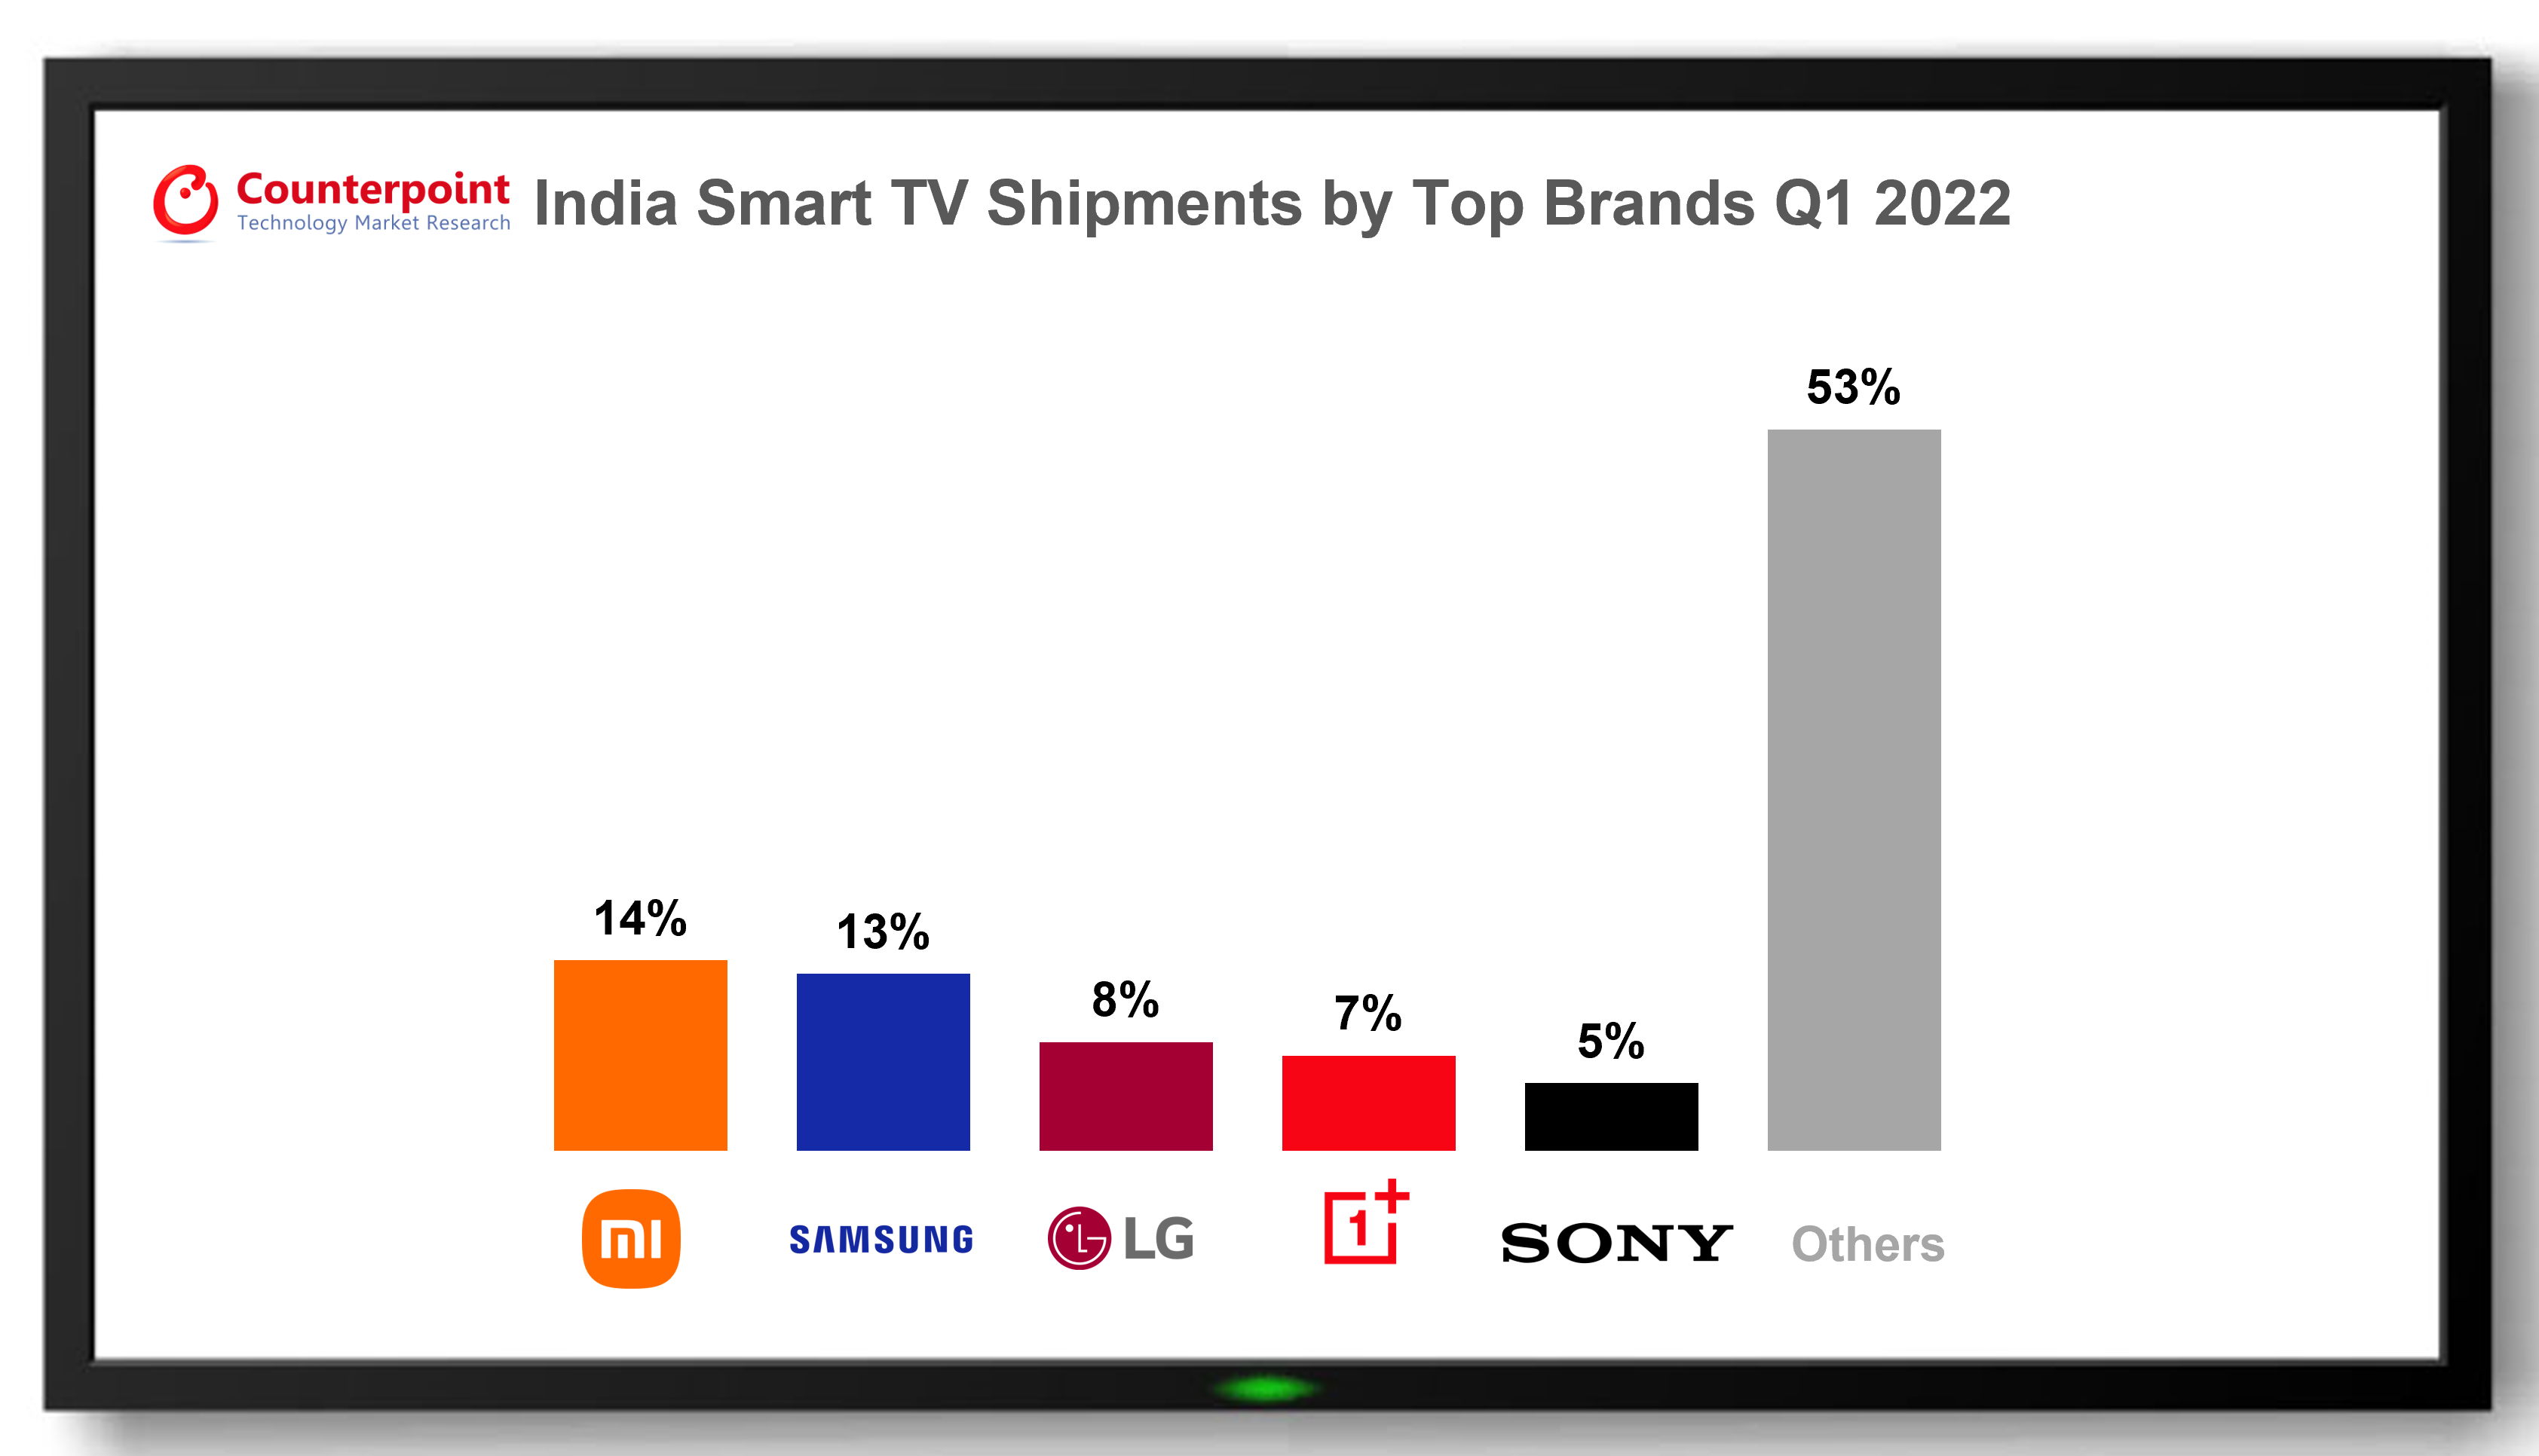 India Smart TV Shipments by Top Brands Q1 2022